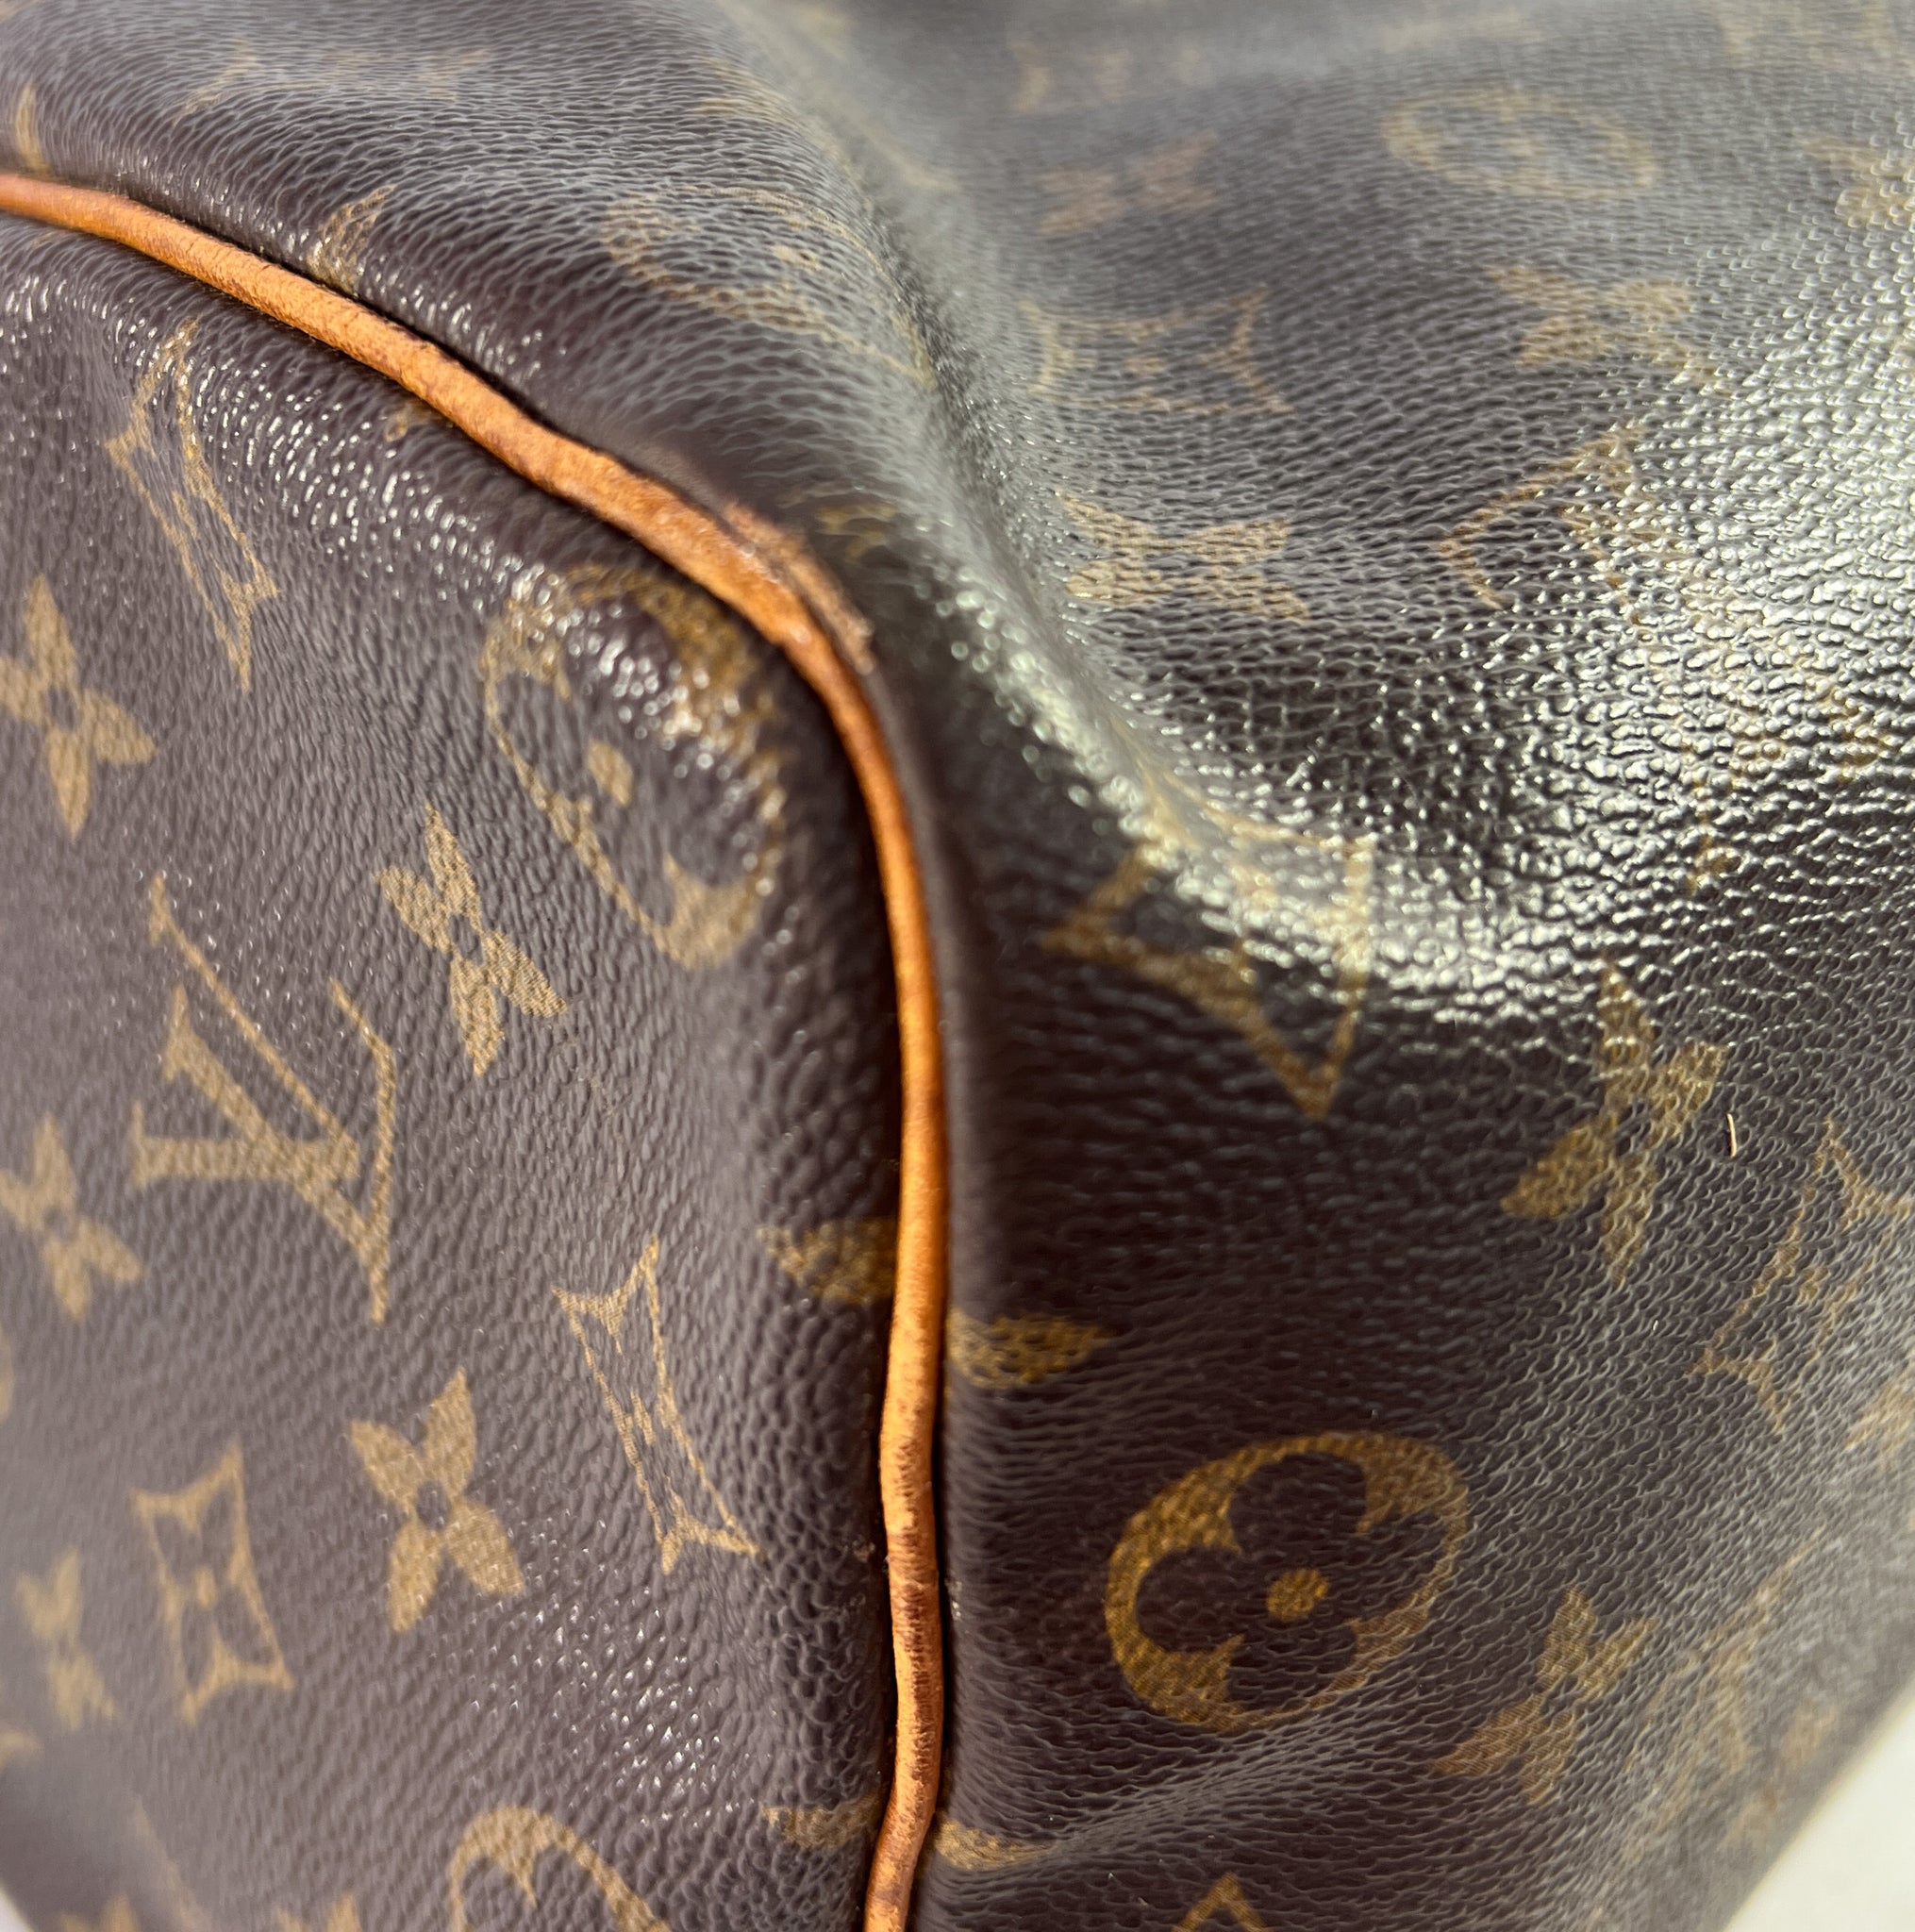 New Vintage x Louis Vuitton Speedy 35 with Hand-Painted Melting Star —  Etc